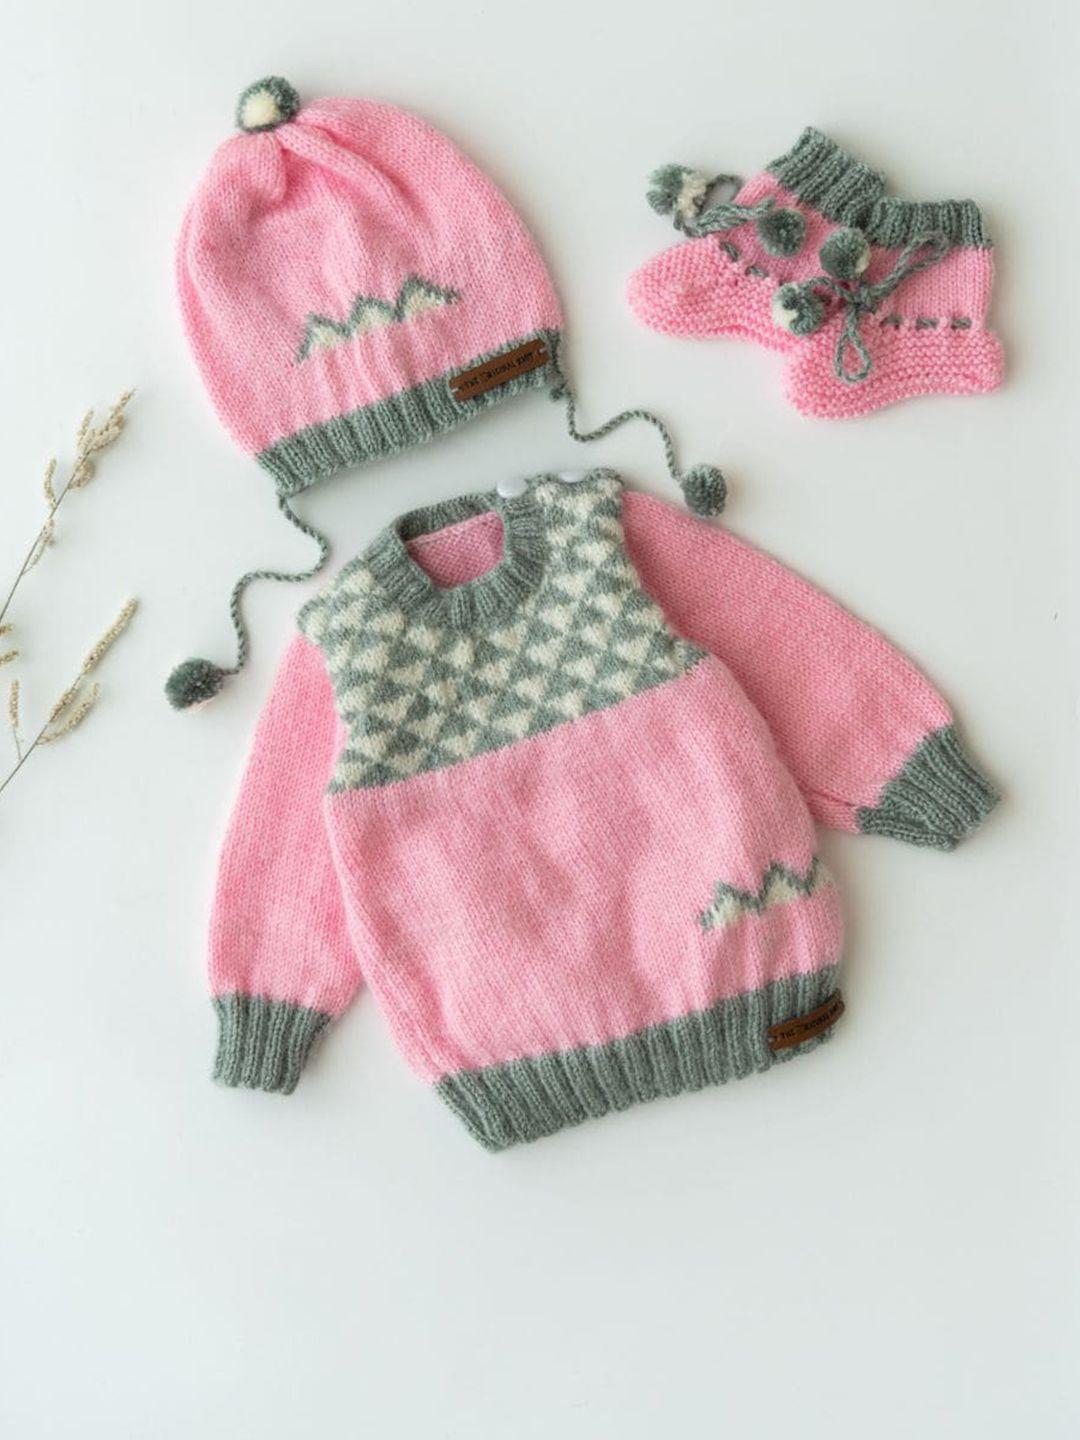 the original knit unisex kids pink & grey cable knit pullover